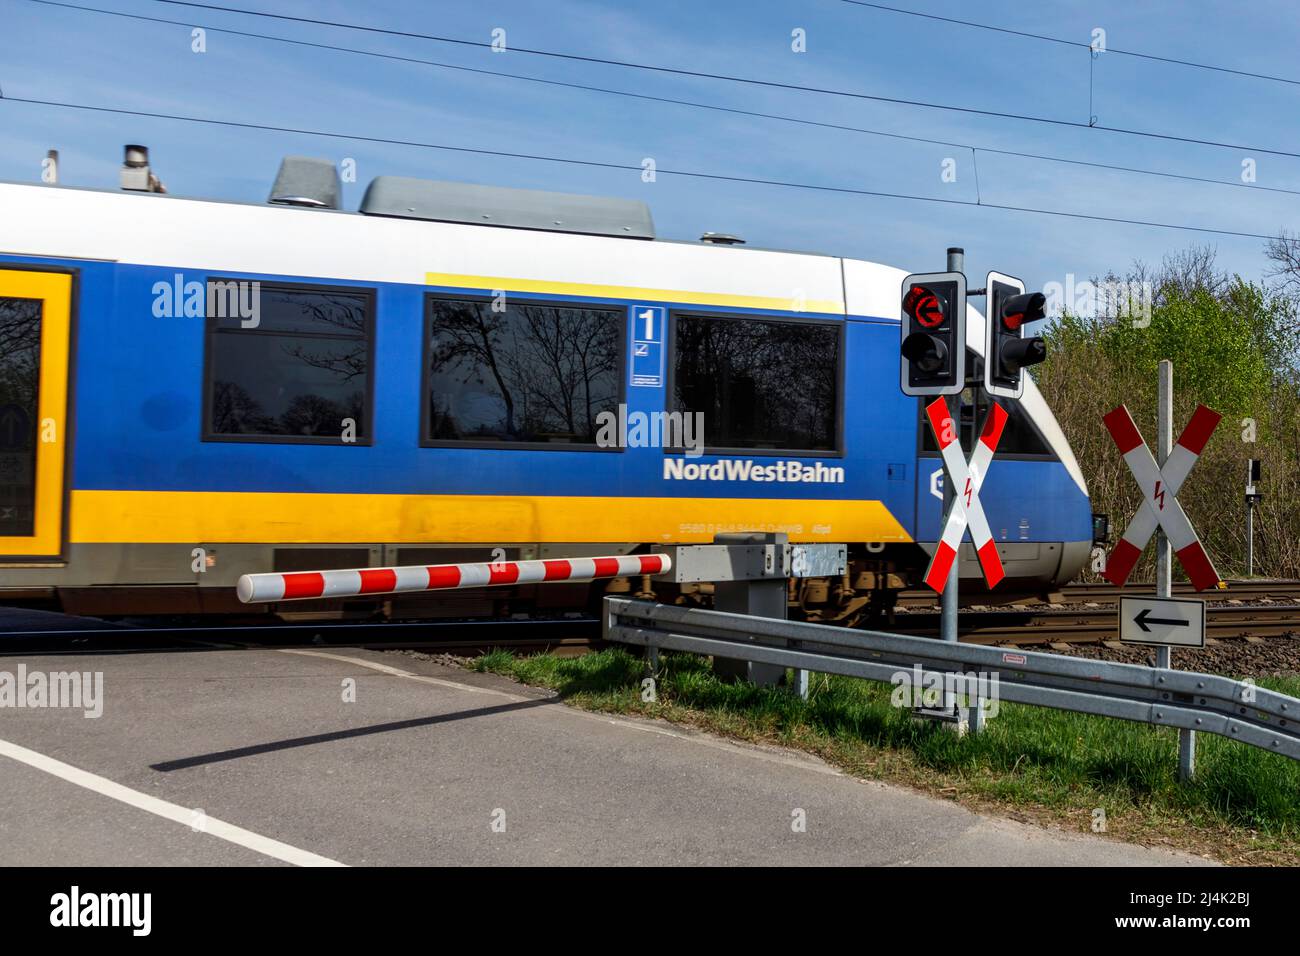 NordWestBahn drives through a level crossing with barriers Stock Photo